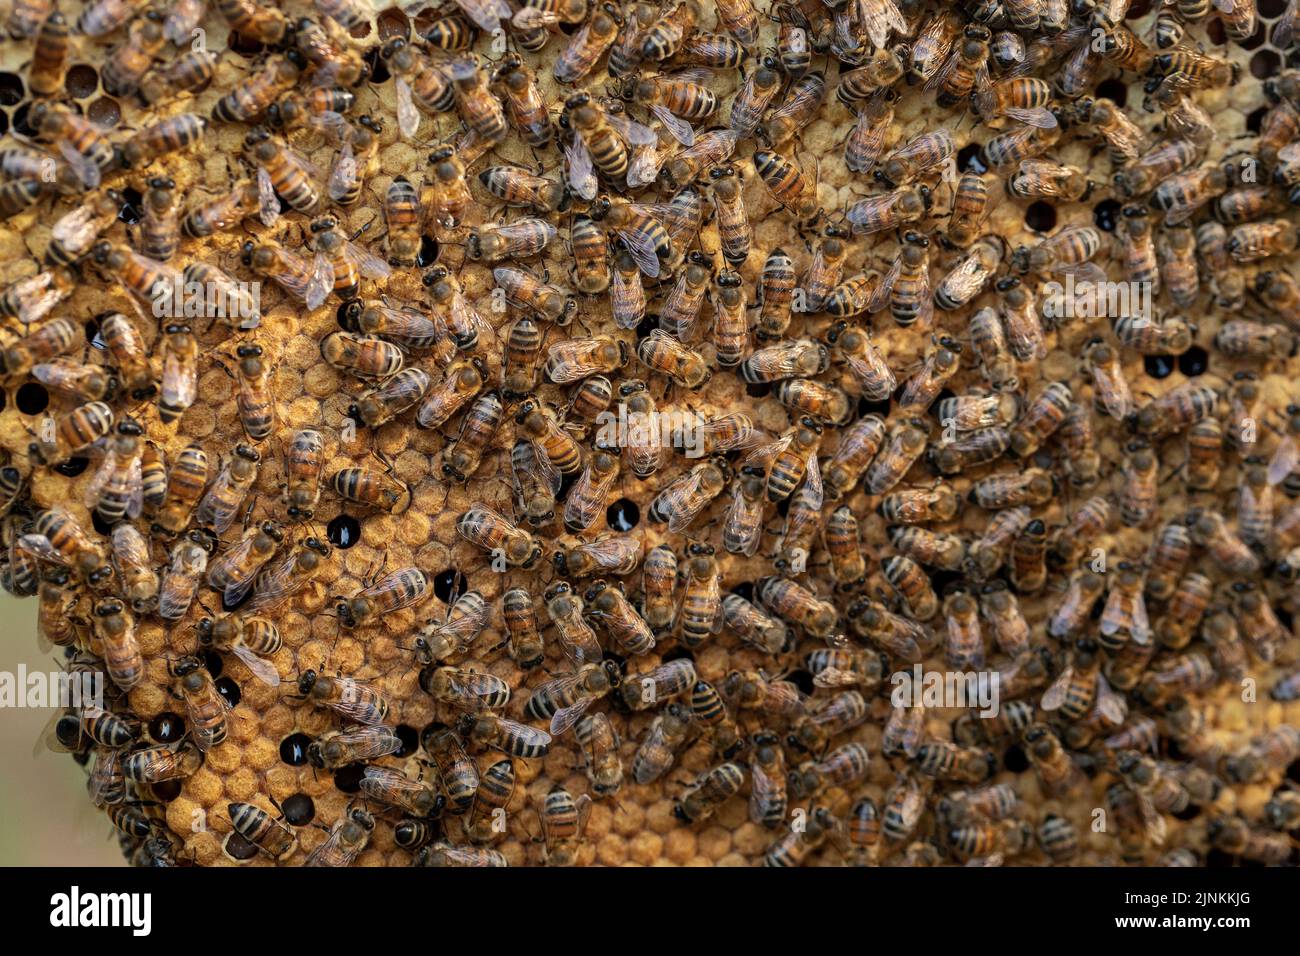 A bee colony on natural honeycomb. Stock Photo